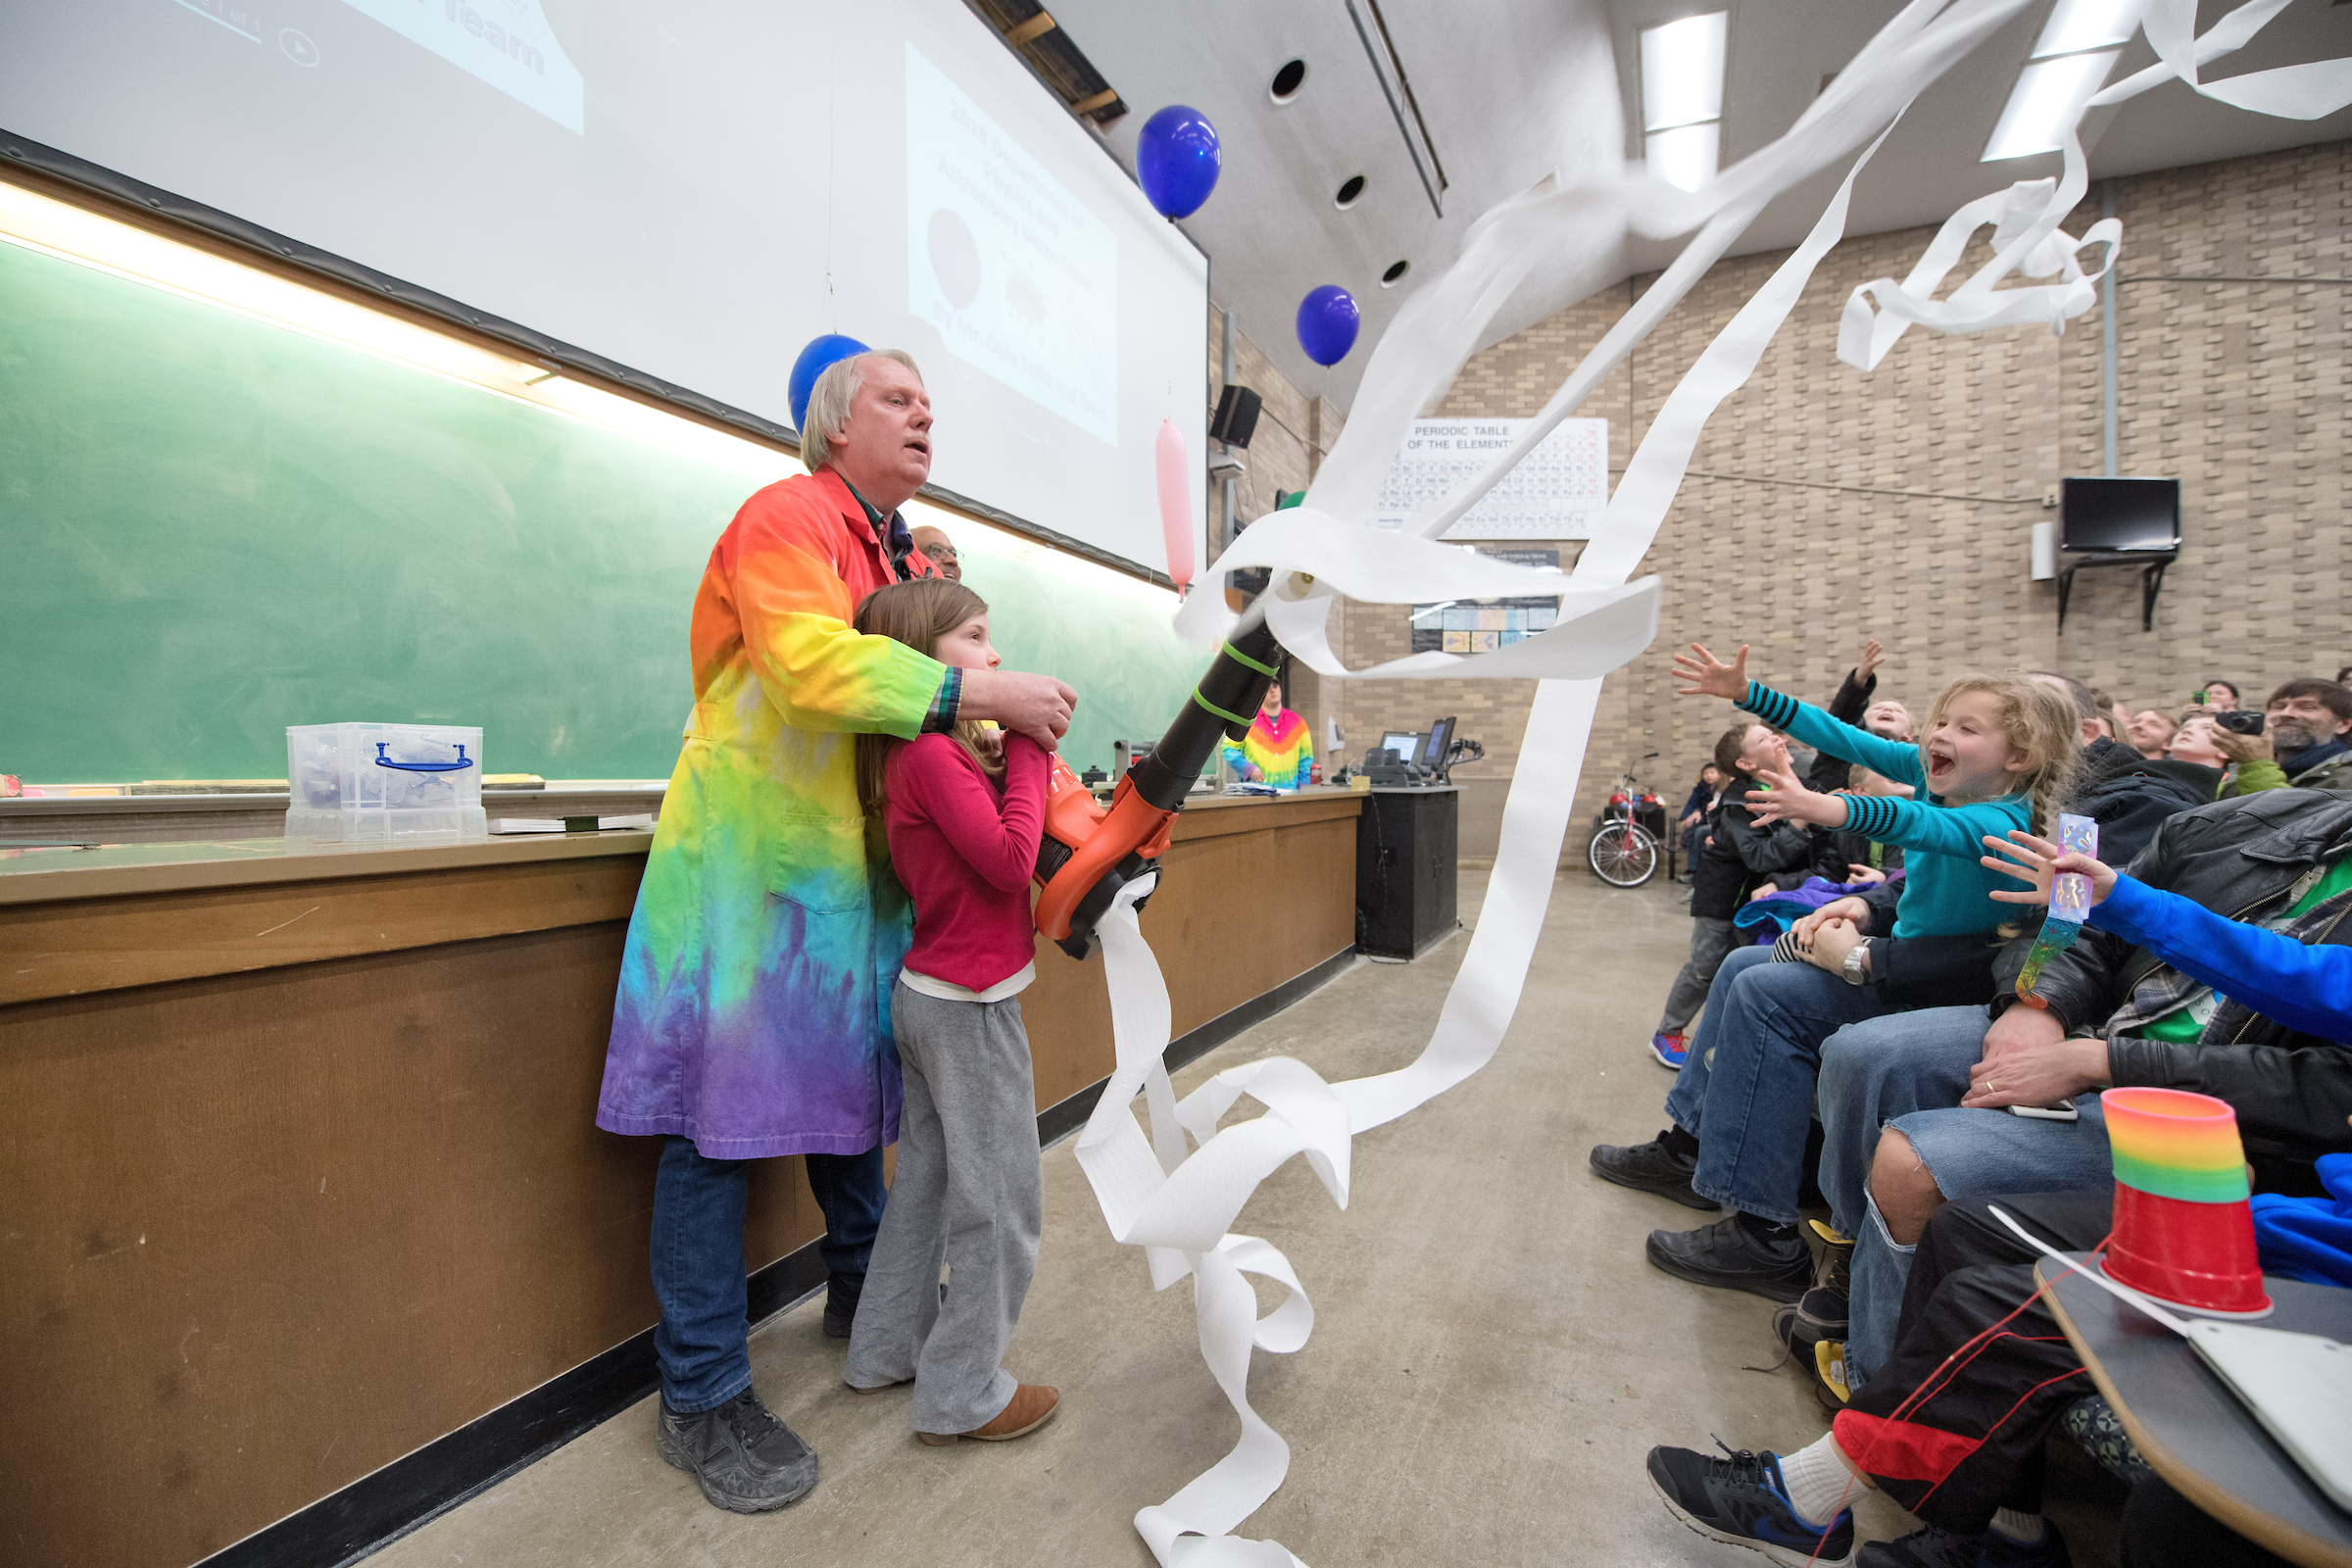 Dale Stille with a toilet paper shooter at a physics demo show